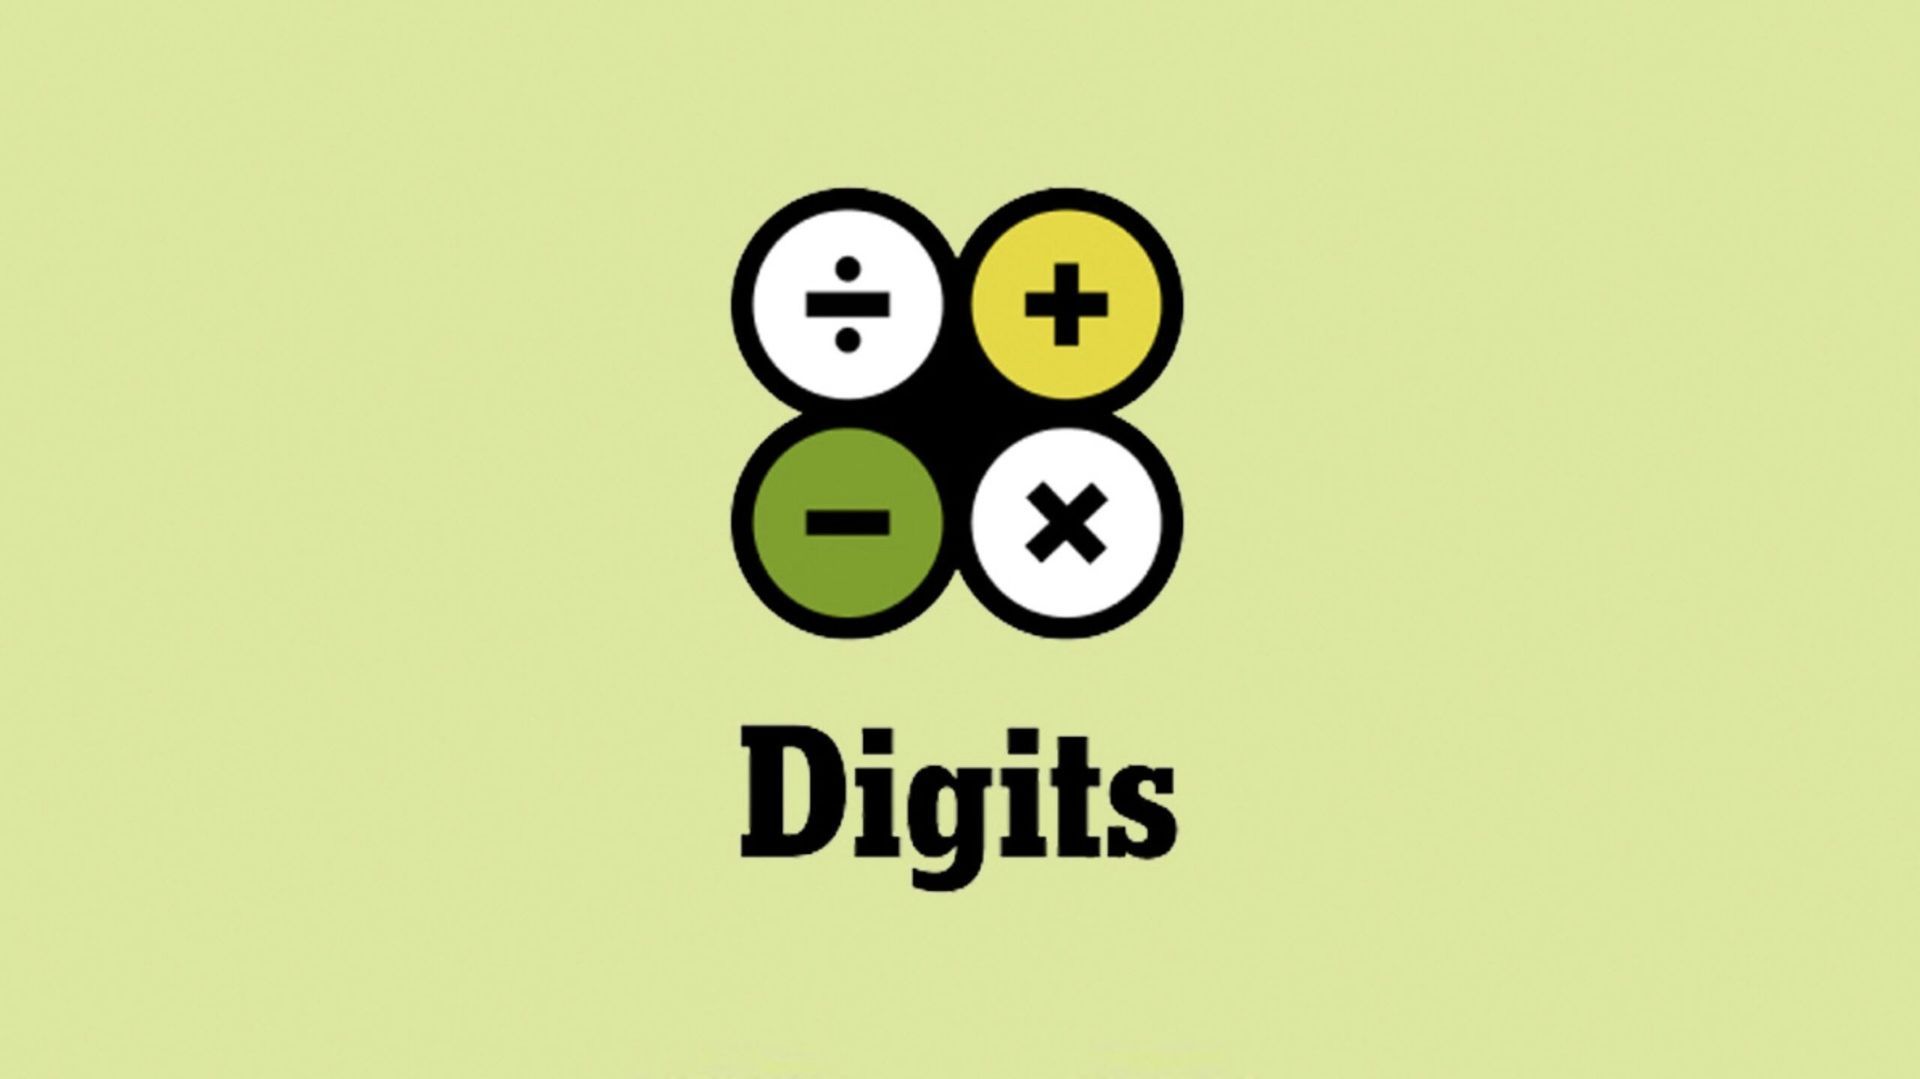 NYT Digits game answers